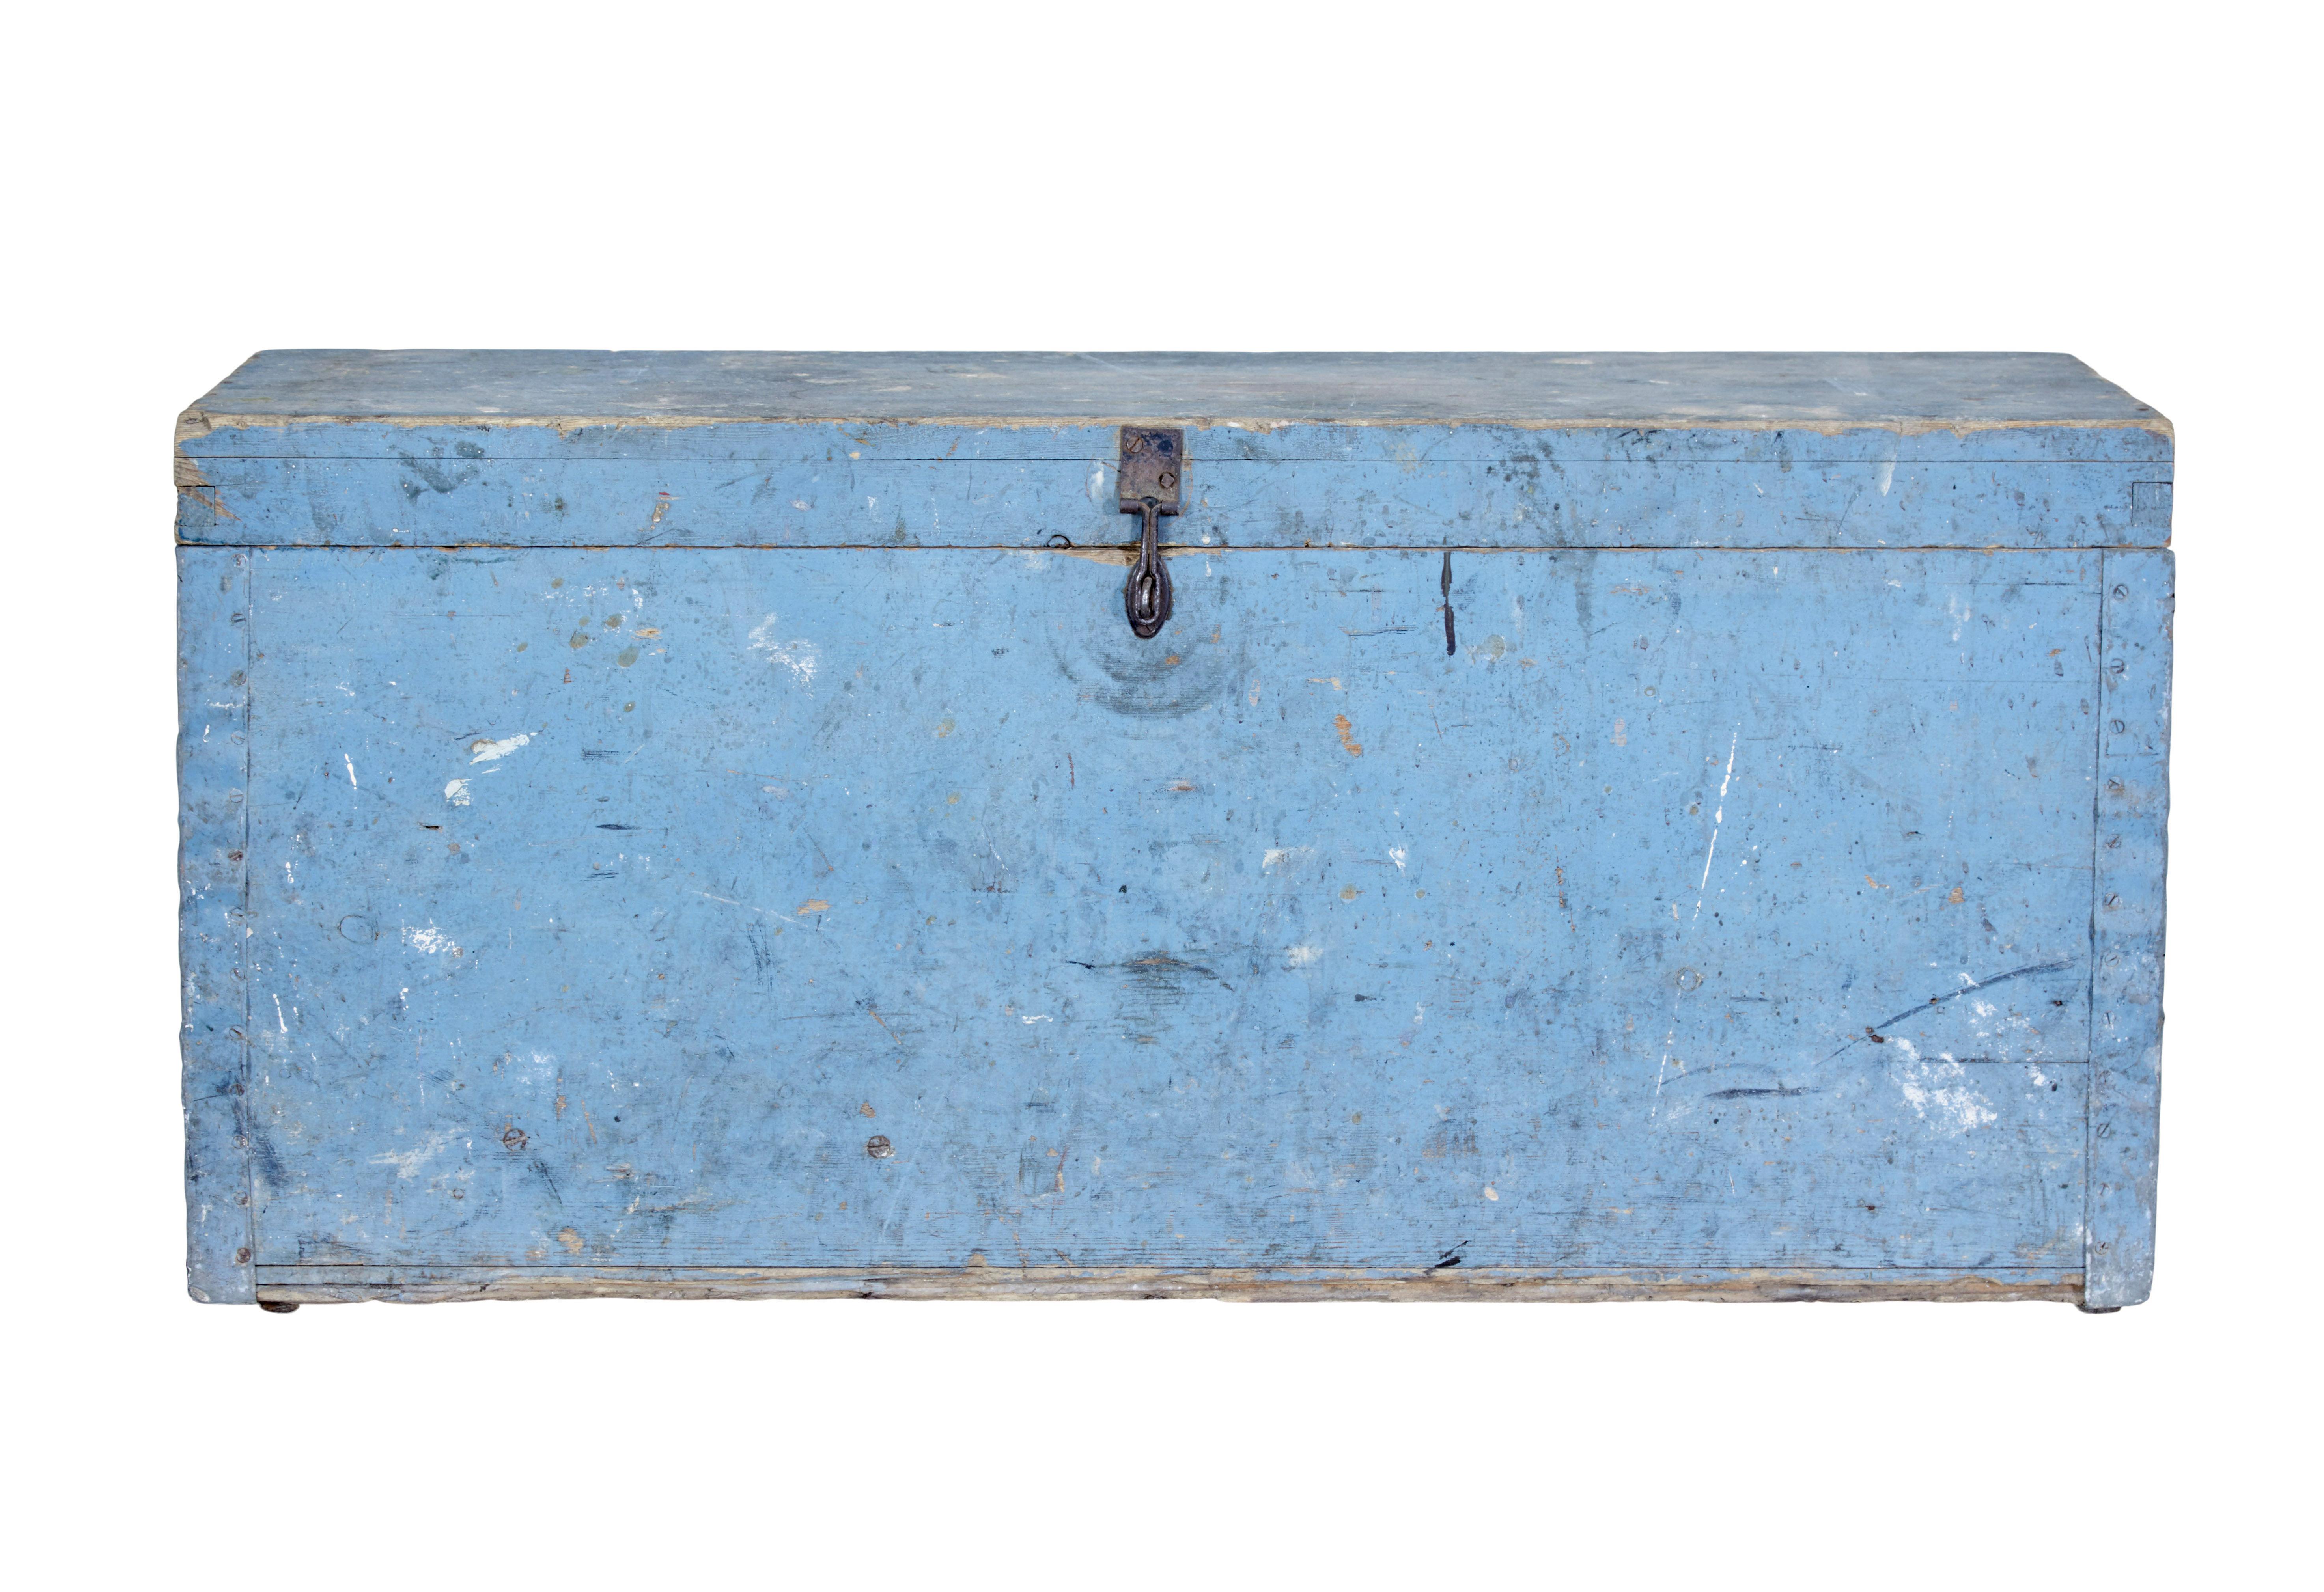 19th century Swedish painted pine tool box circa 1890.

Rustic made tool box in it's original blue paint. Pine box with painted metalwork on the corners.  Metal latch which allows it to be padlocked.  Lid opens to reveal a partially fitted